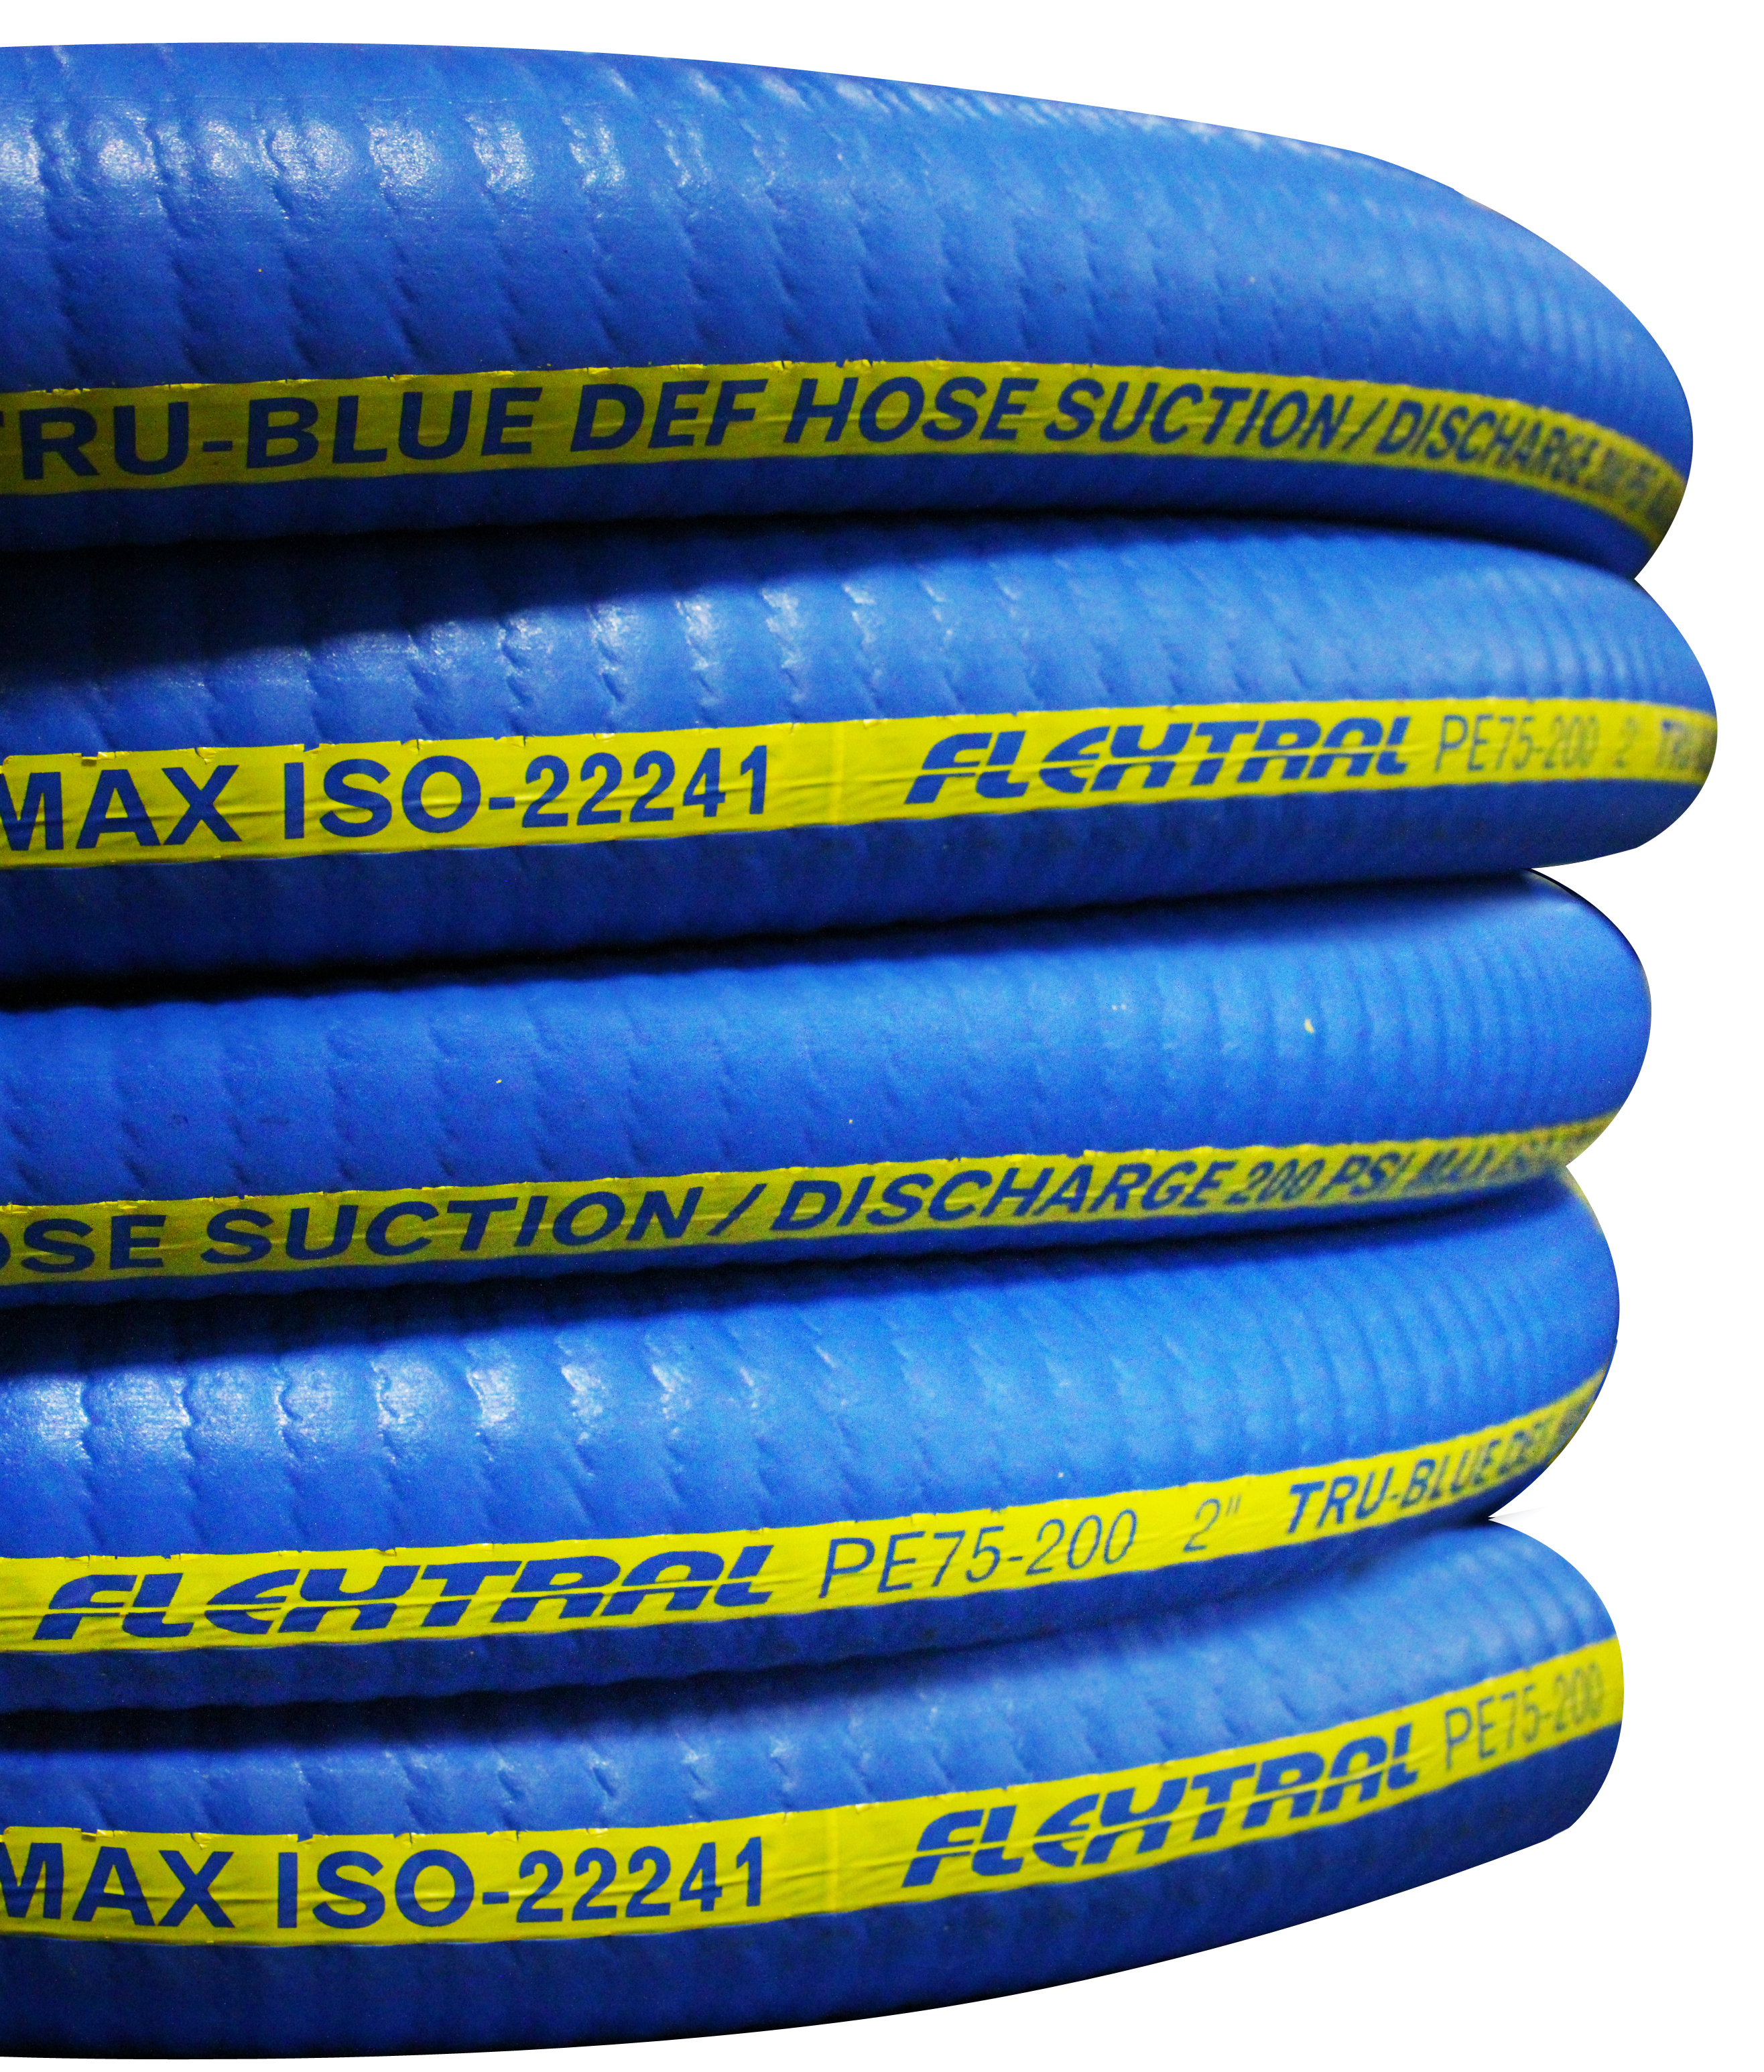 DEF Hose and Couplers - Semler Industries